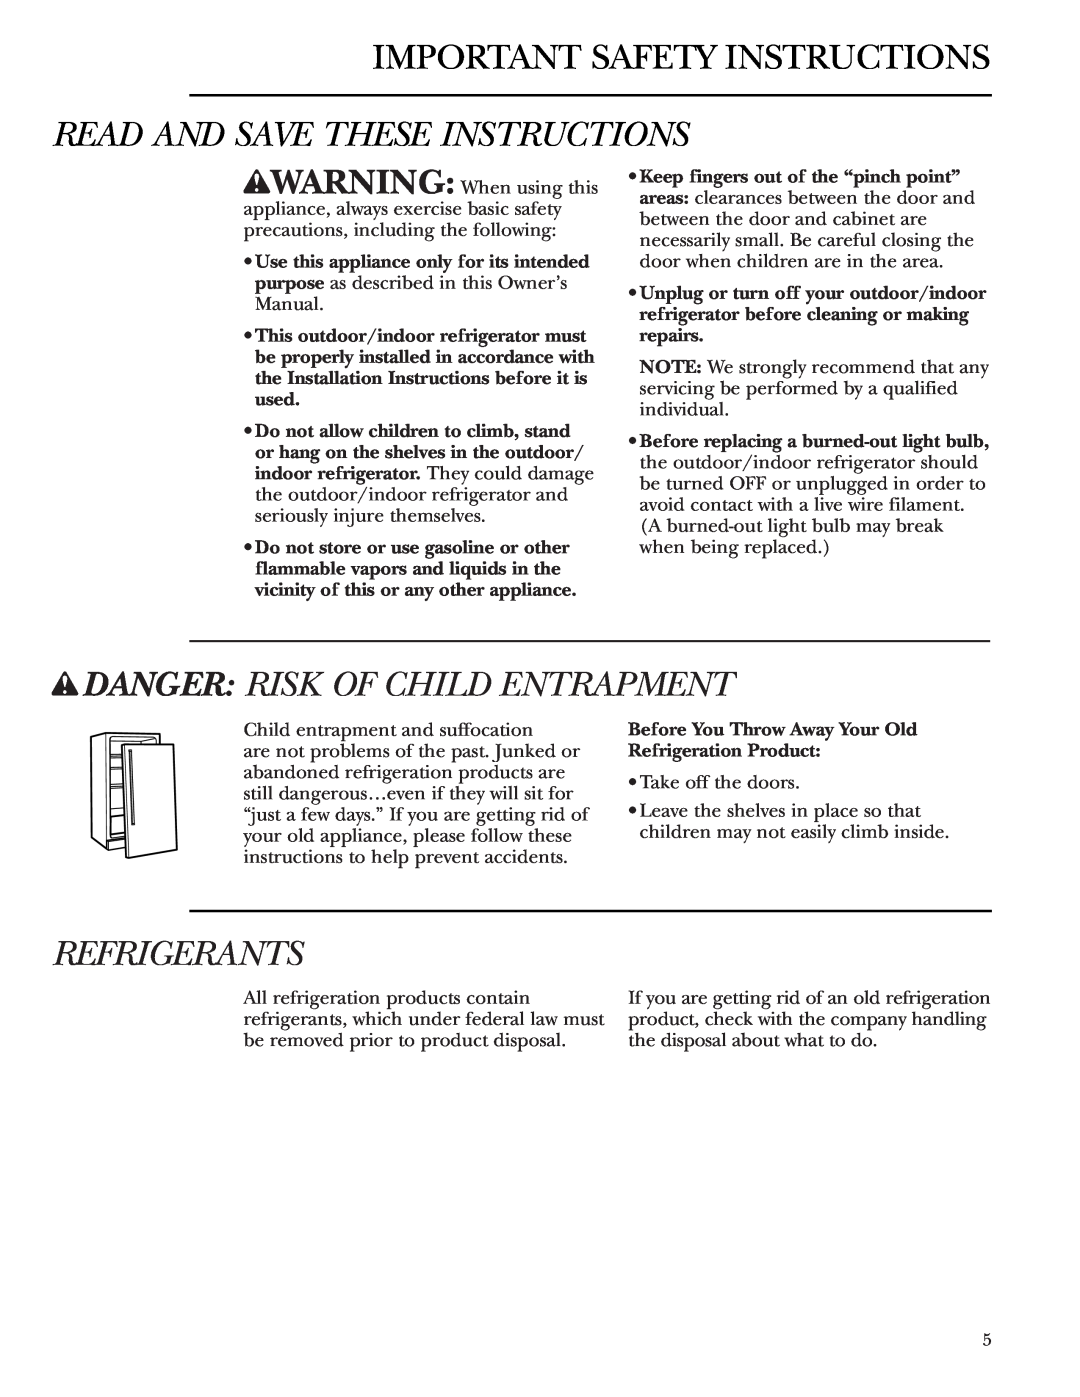 GE Monogram ZDOD240 Important Safety Instructions, Read And Save These Instructions, wDANGER RISK OF CHILD ENTRAPMENT 